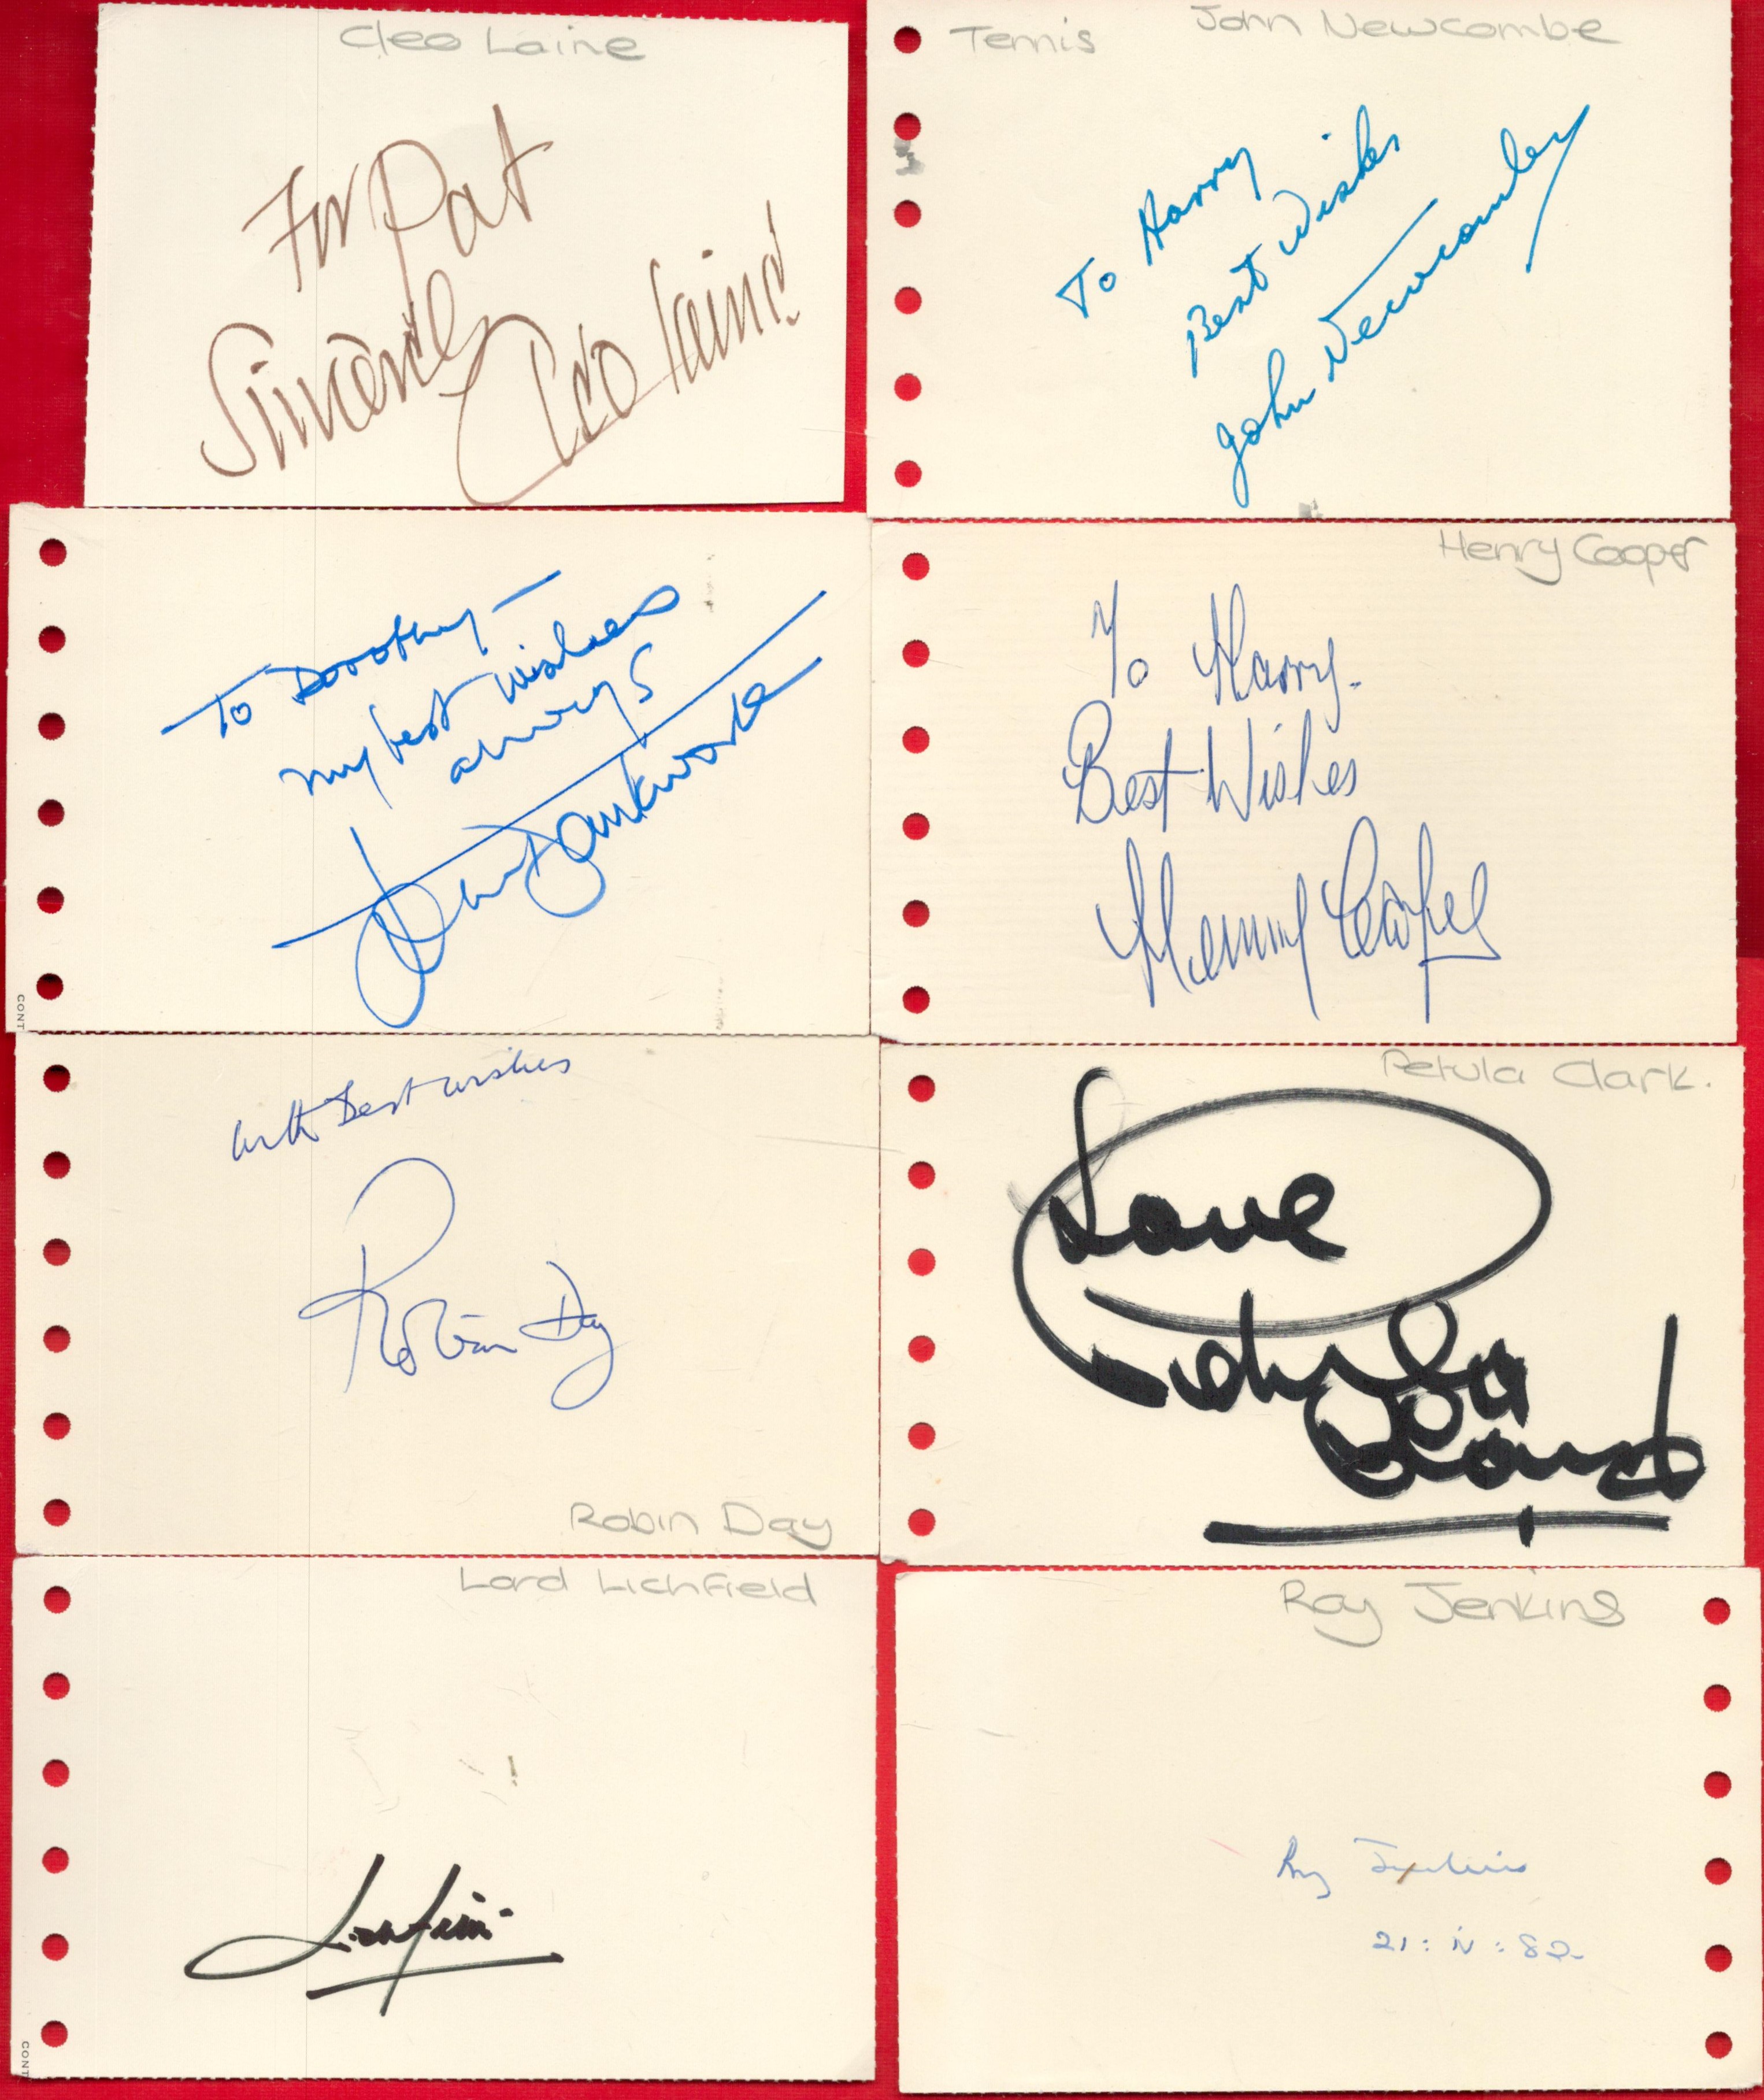 Autograph Collection of 14 Assorted Signatures on Signature Pieces. Signatures include Ranulph